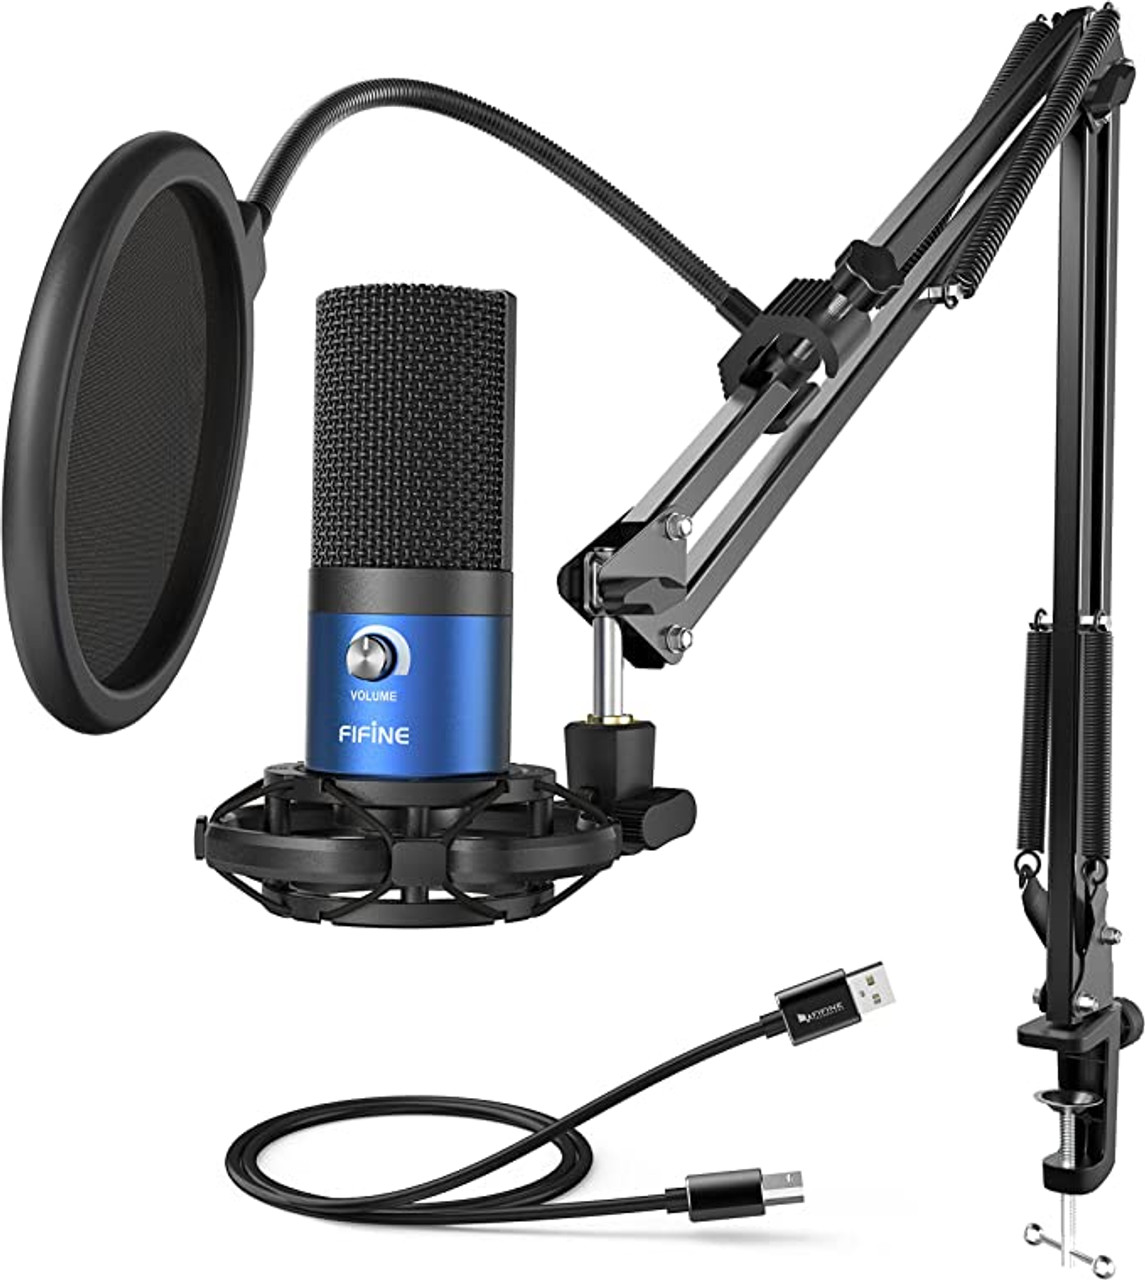 Fifine T669 Pro3 RGB USB Condensor Gaming Microphone, T669, AYOUB  COMPUTERS